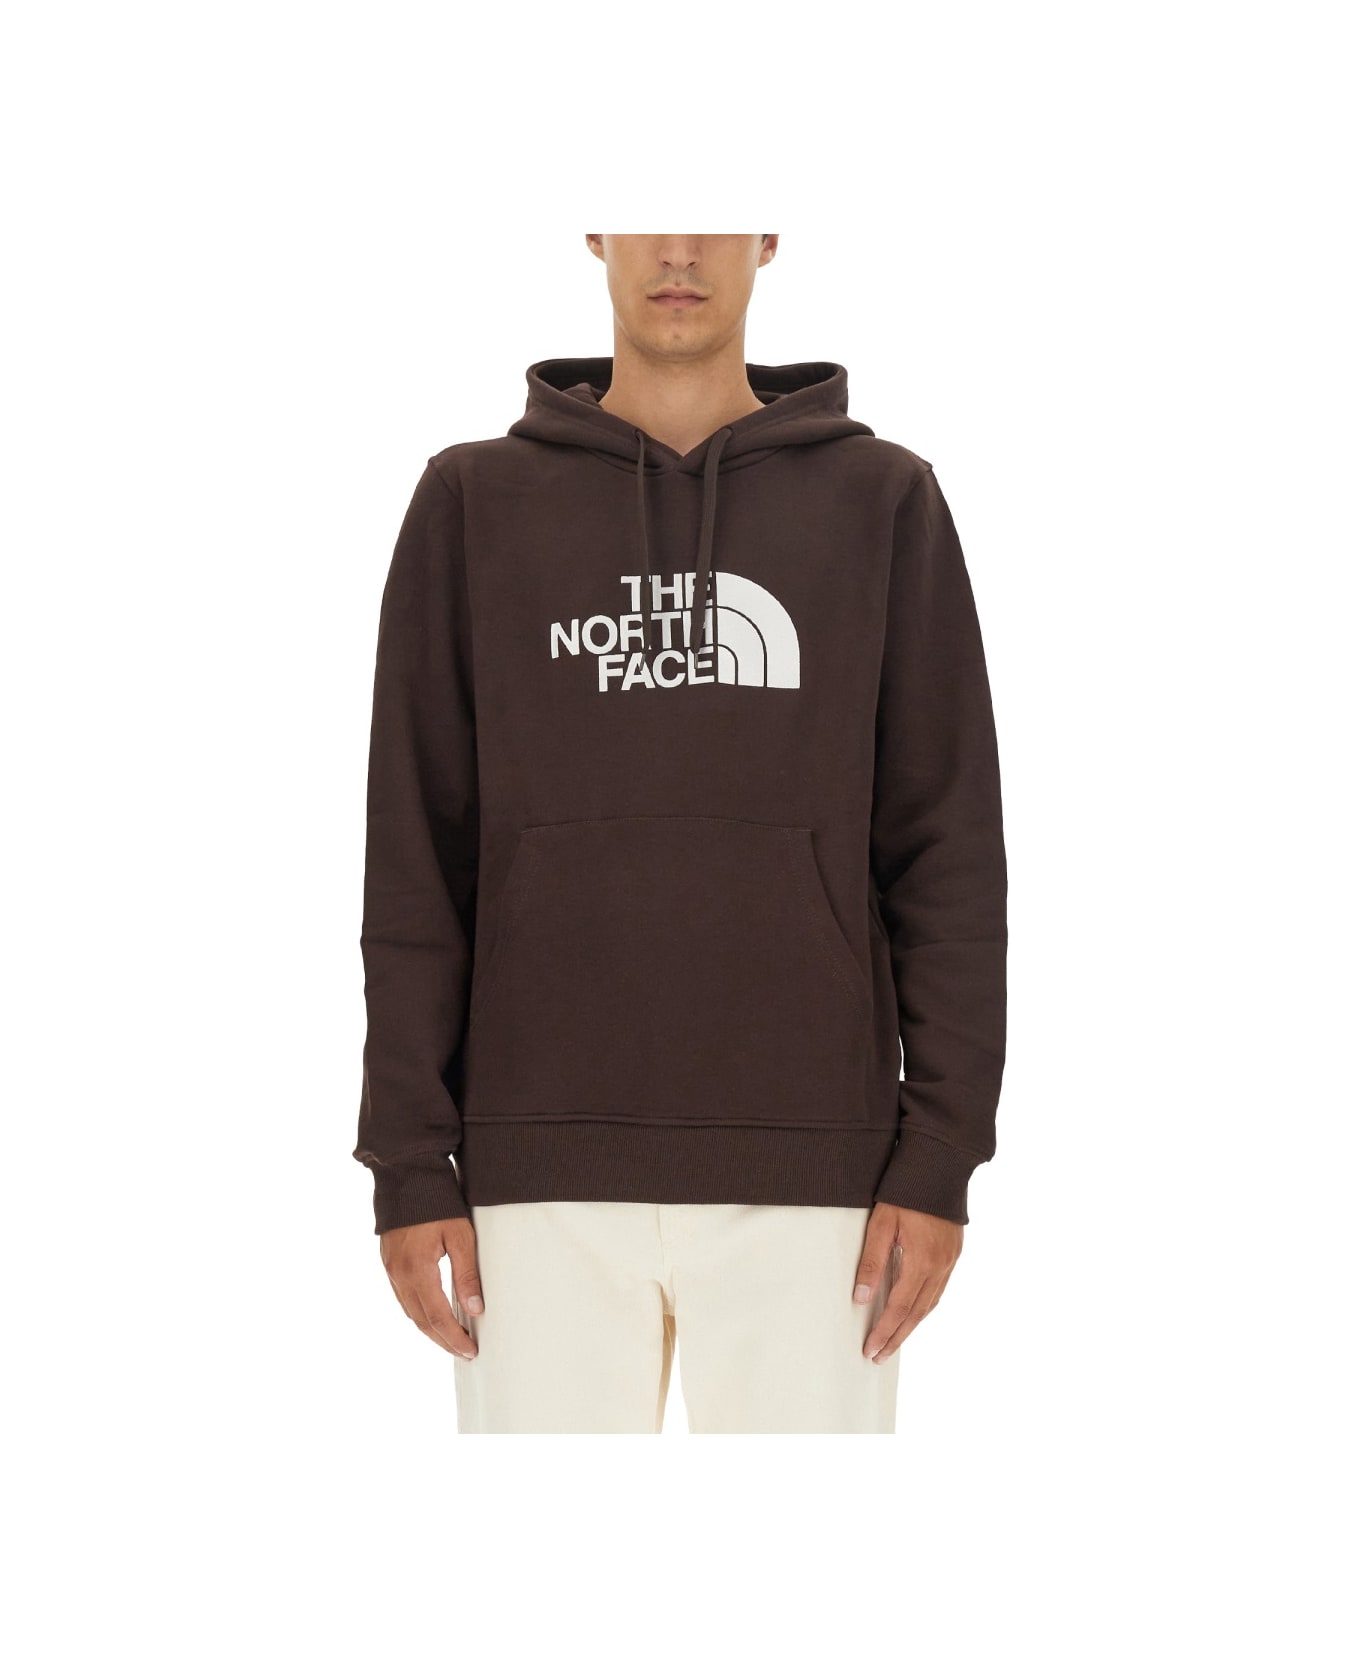 The North Face Sweatshirt With Logo - BROWN